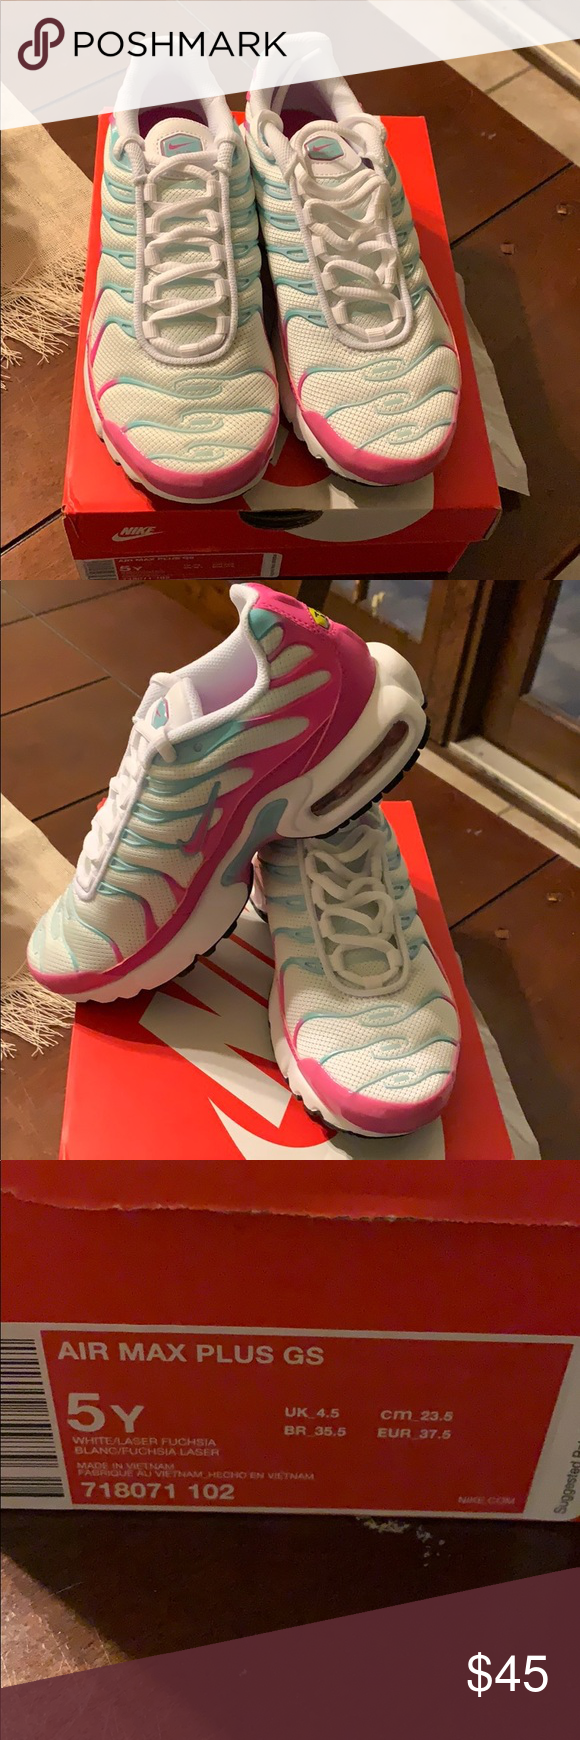 Nike Air Max Plus Gs Sz 5Y but fits 6.5 in Women’s Size   Sizing and colorways…